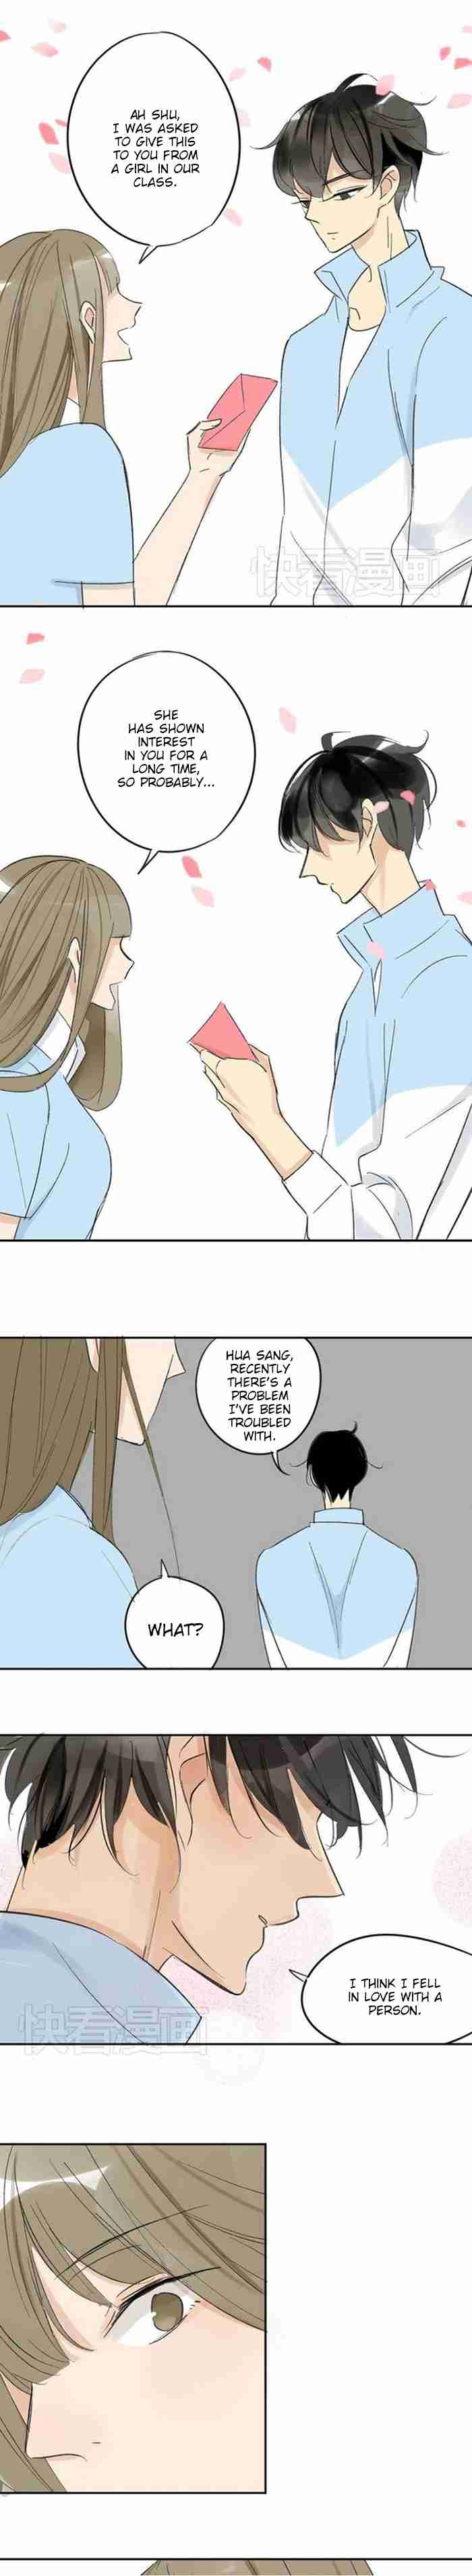 Classmate Relationship? Ch. 71 You Changed